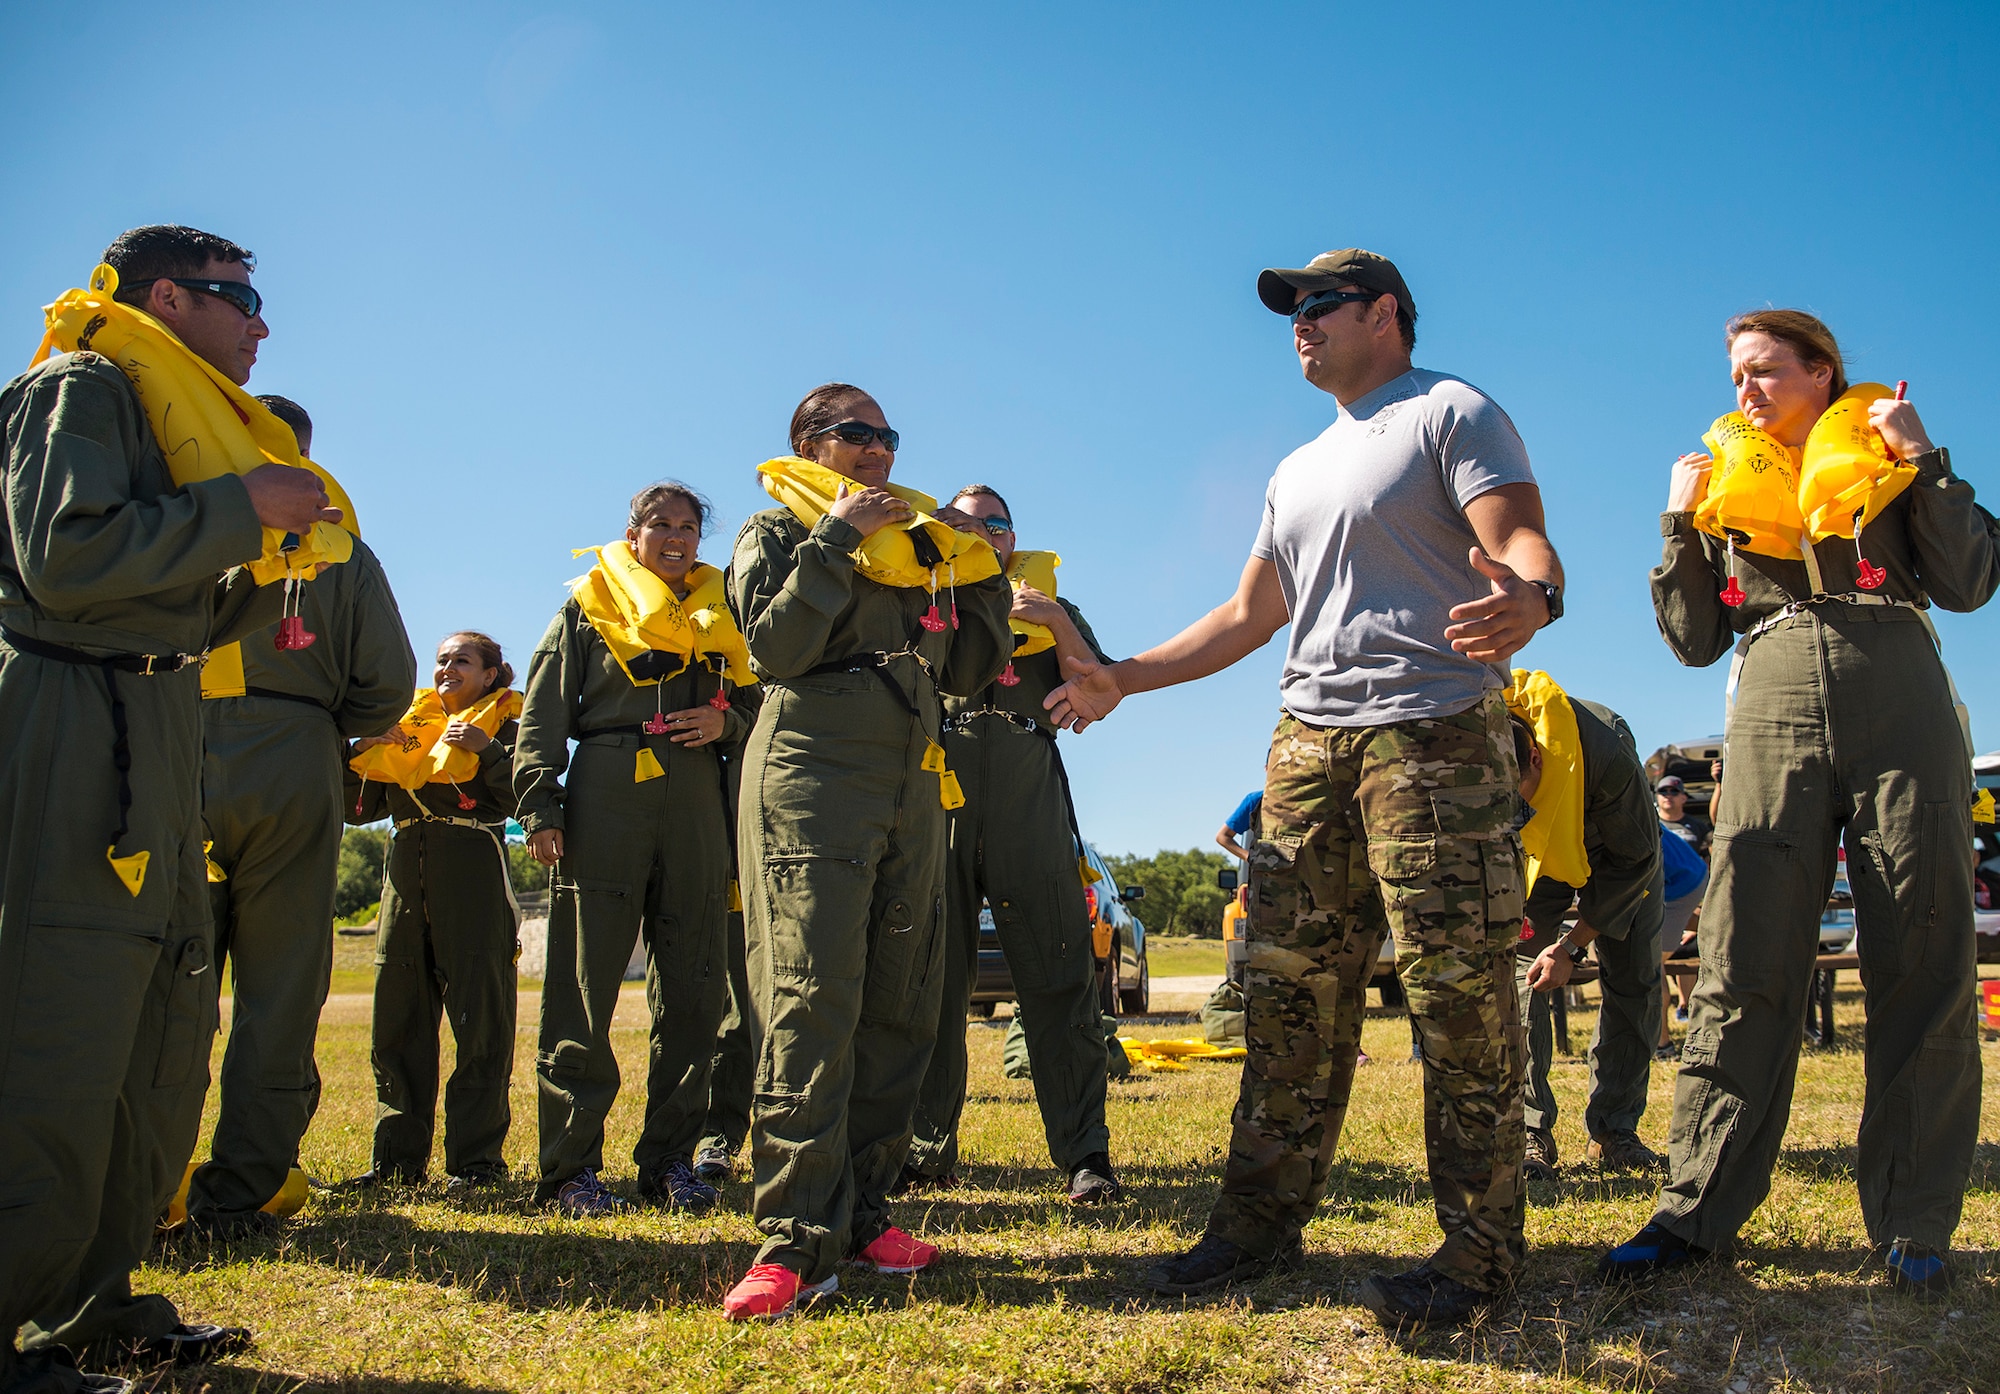 Tech. Sgt. Justin Samaniego, 433rd Operation Support Squadron survival evasion resistance and escape instructor, discusses open water rescue and recovery techniques with Airmen from the 433rd Aeromedical Evacuation Squadron during water survival training May 5, 2017 at Joint Base San Antonio-Canyon Lake. The triannual training is a requirement for all aircrew Air Force Specialty Codes and includes open water swimming and life raft training. (U.S. Air Force photo by Benjamin Faske)